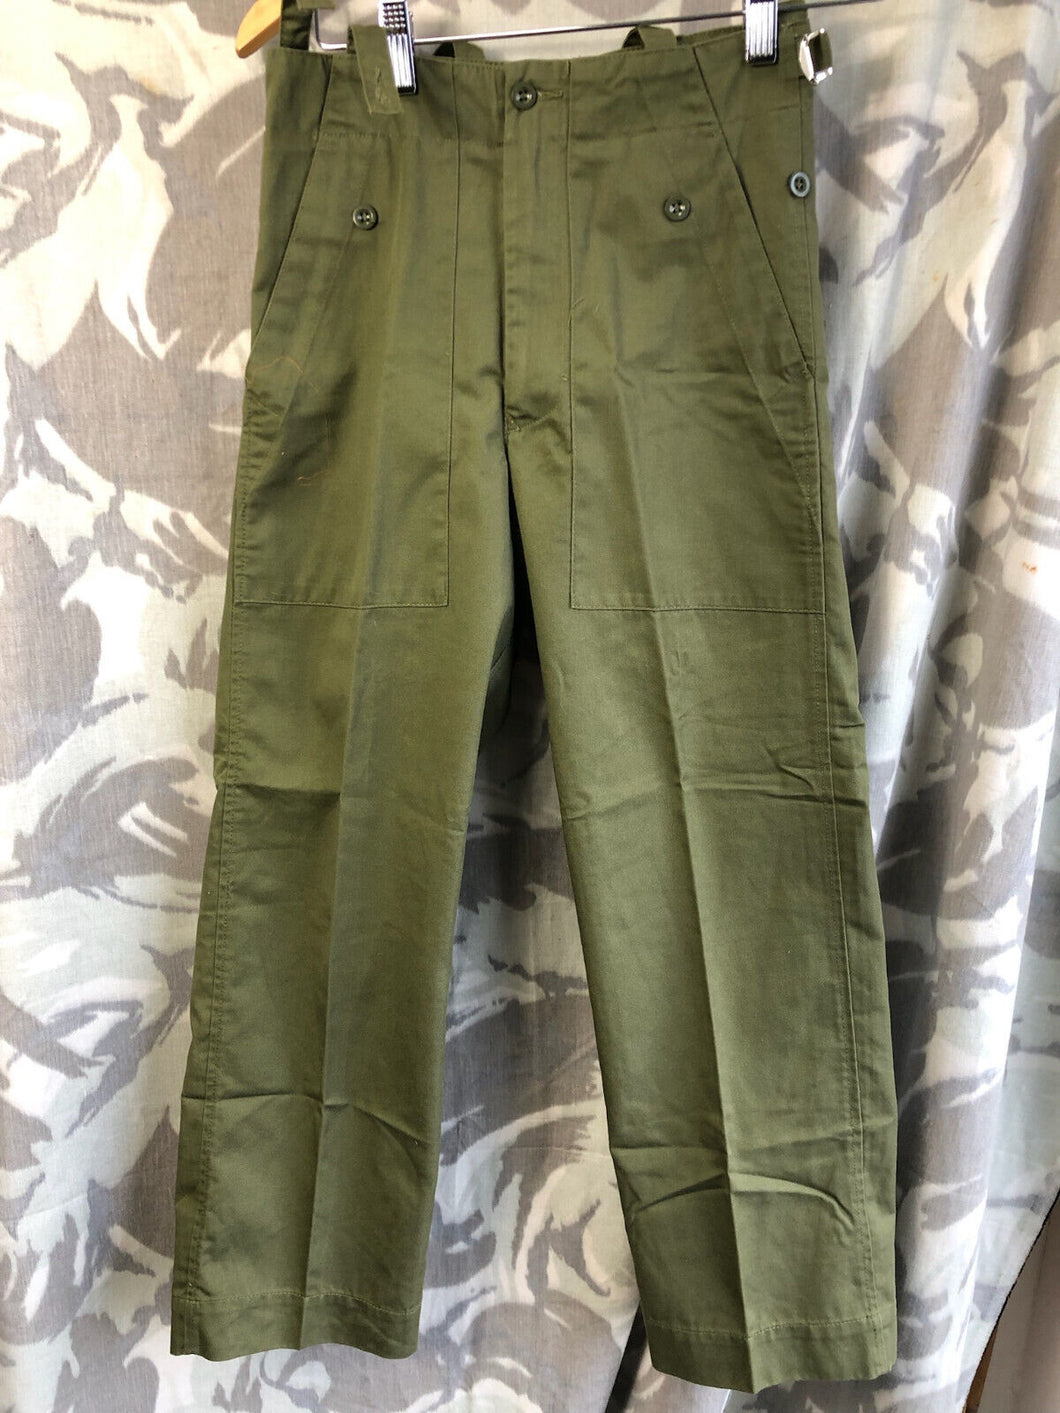 Genuine British Army OD Green Fatigue Combat Trousers - Size 66/68/76